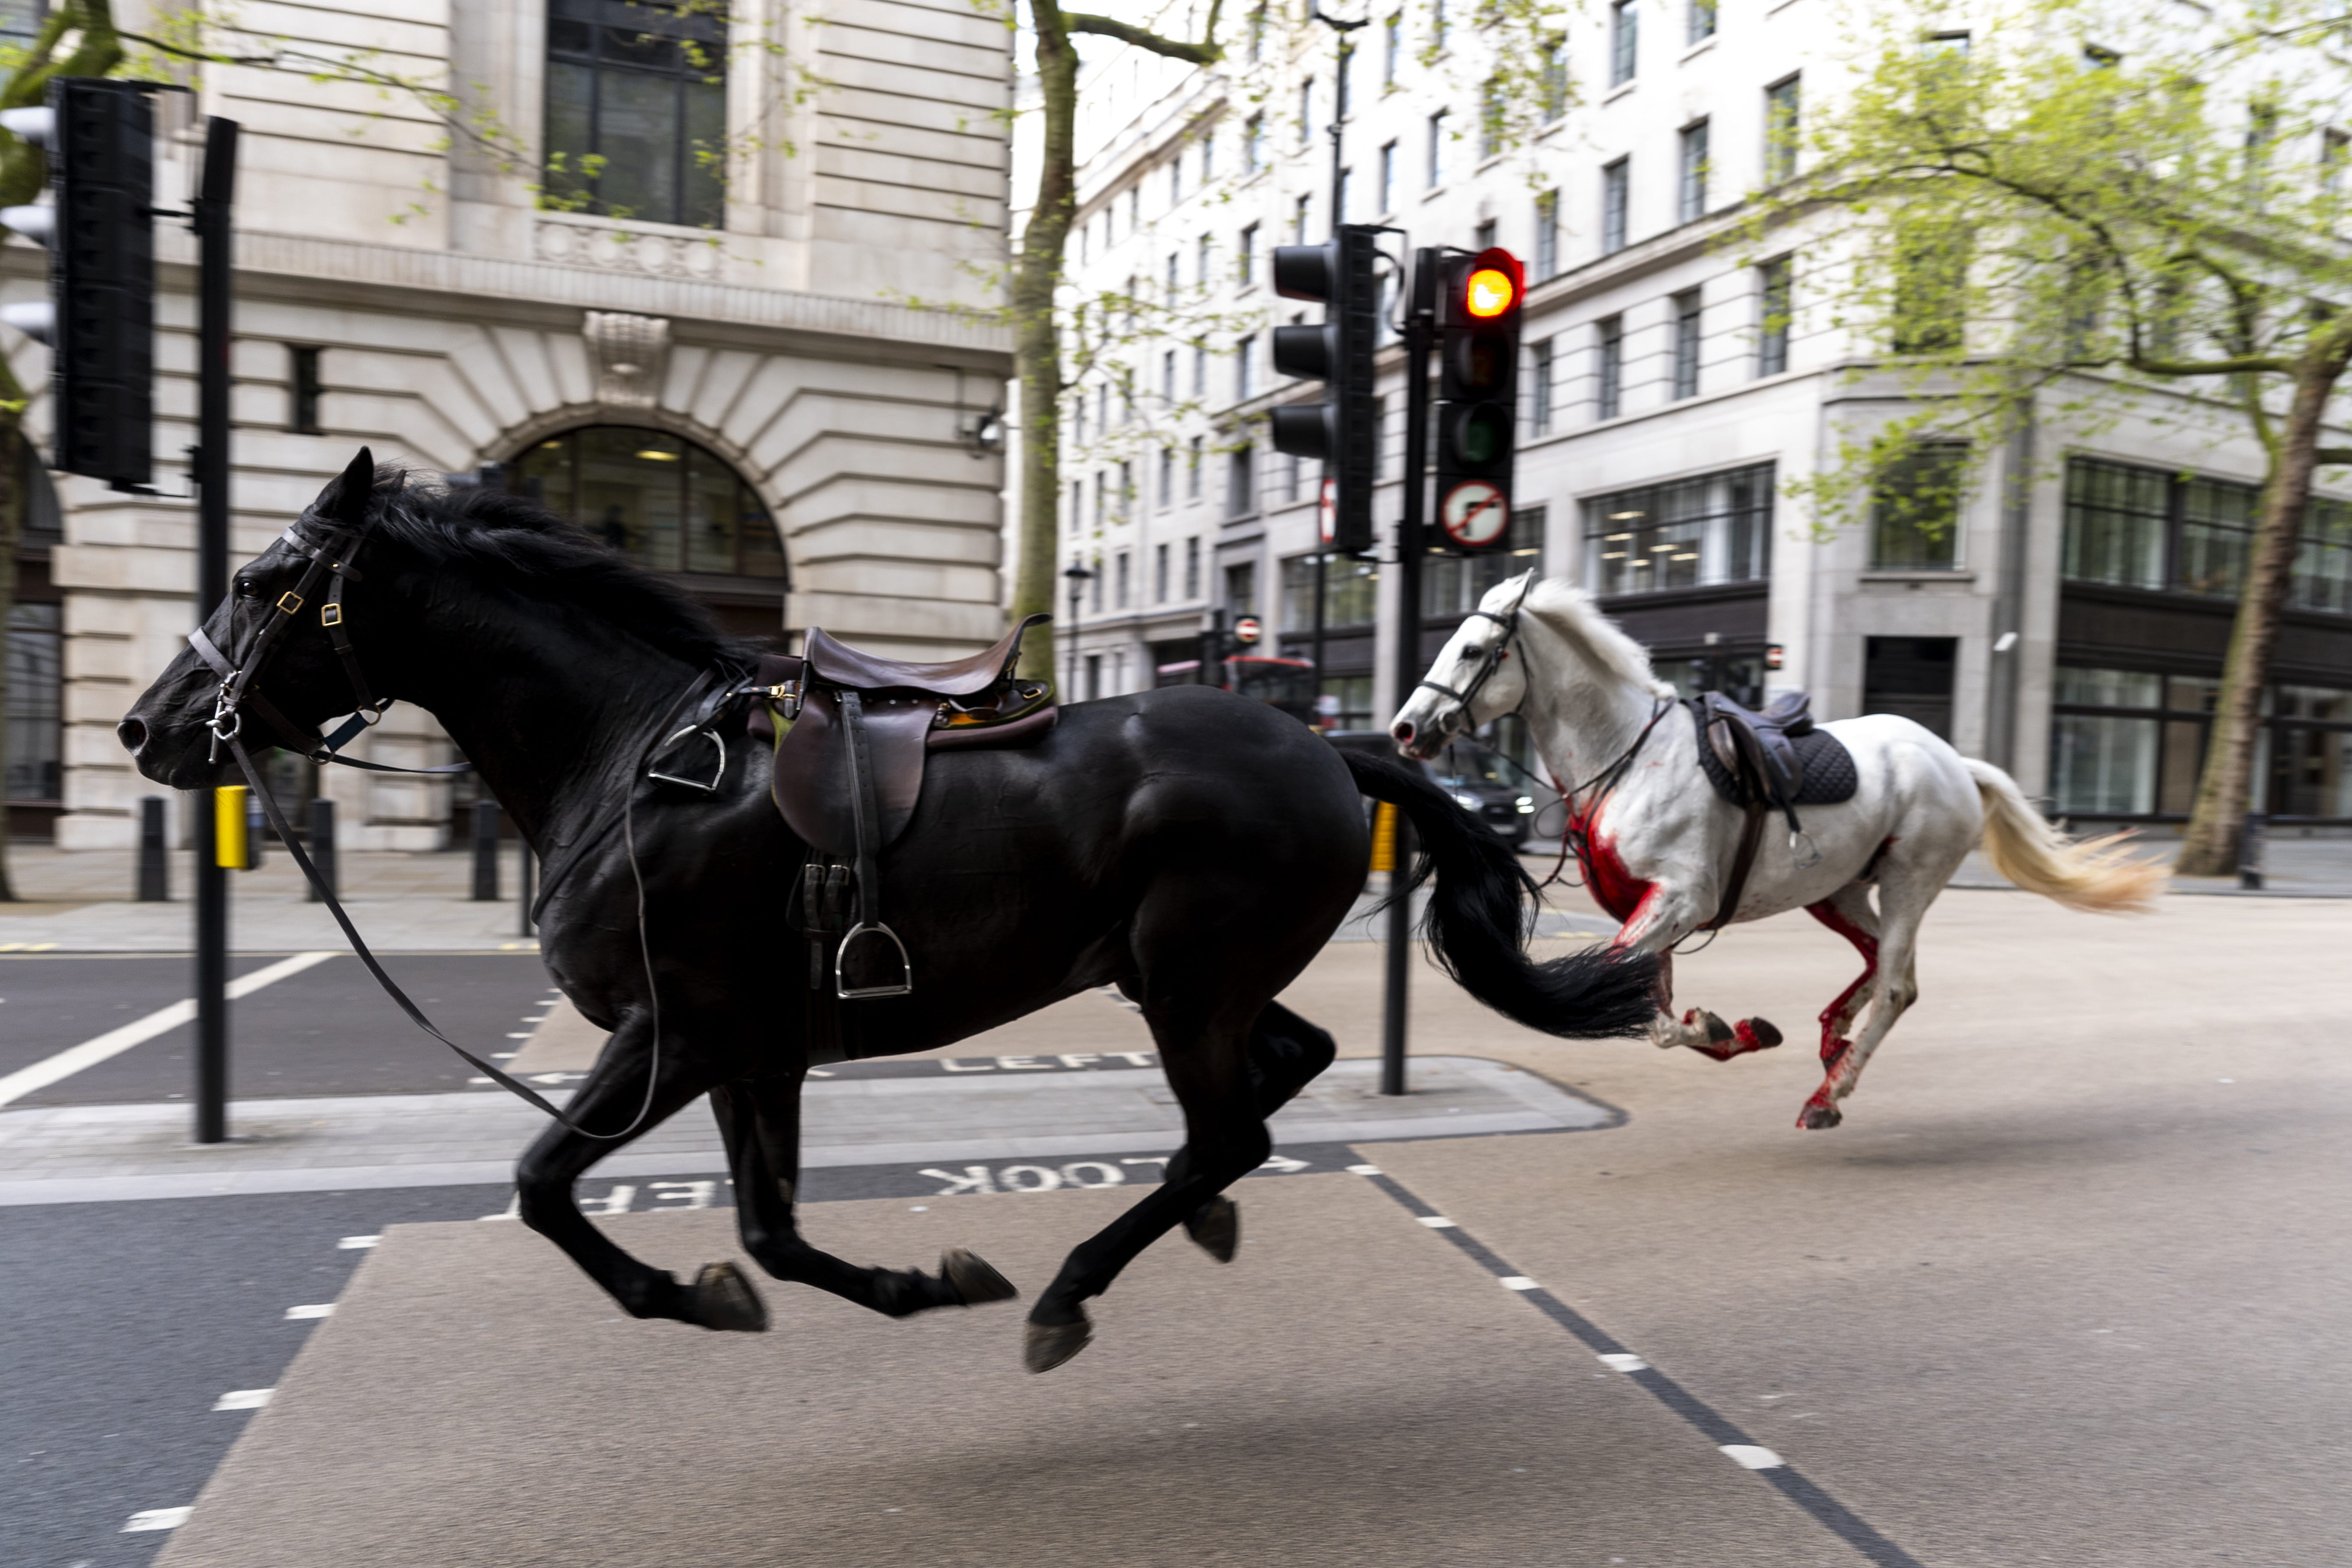 london, household cavalry regiment, army issues update on injured household cavalry horses that rampaged across london